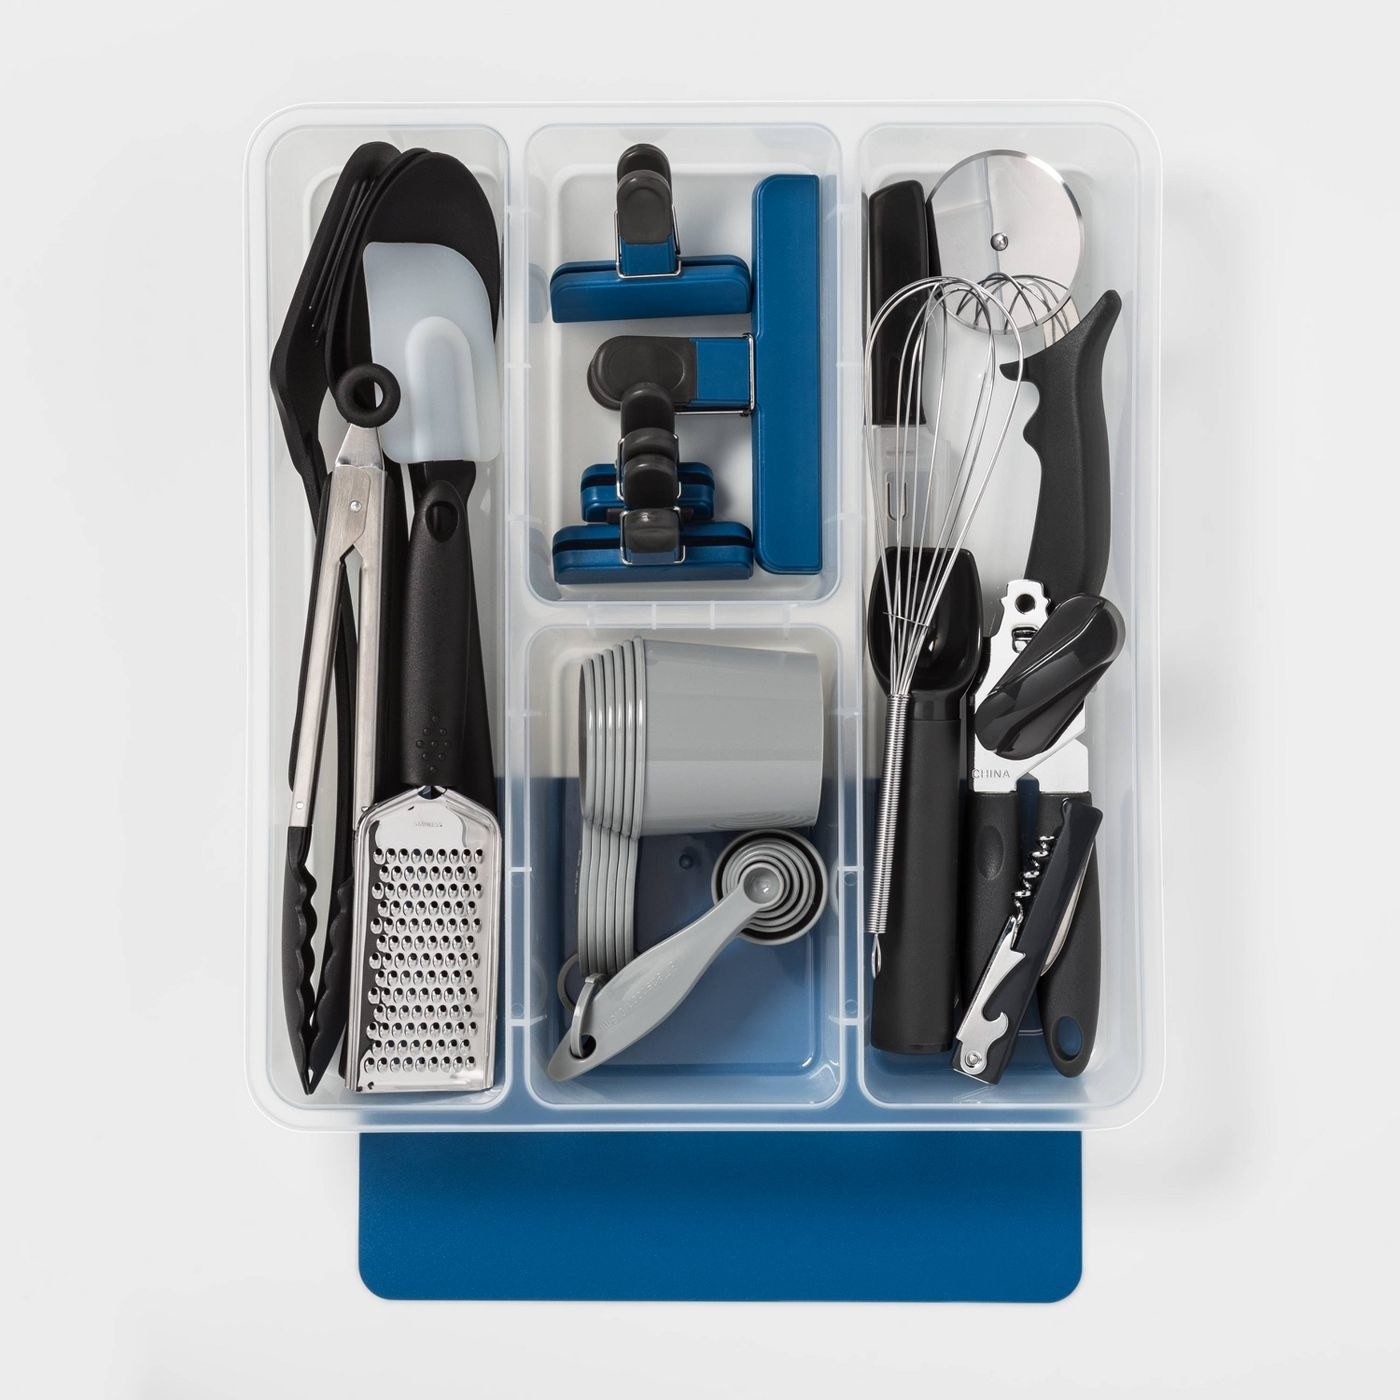 Utensil set with essential kitchen items and organizing tray